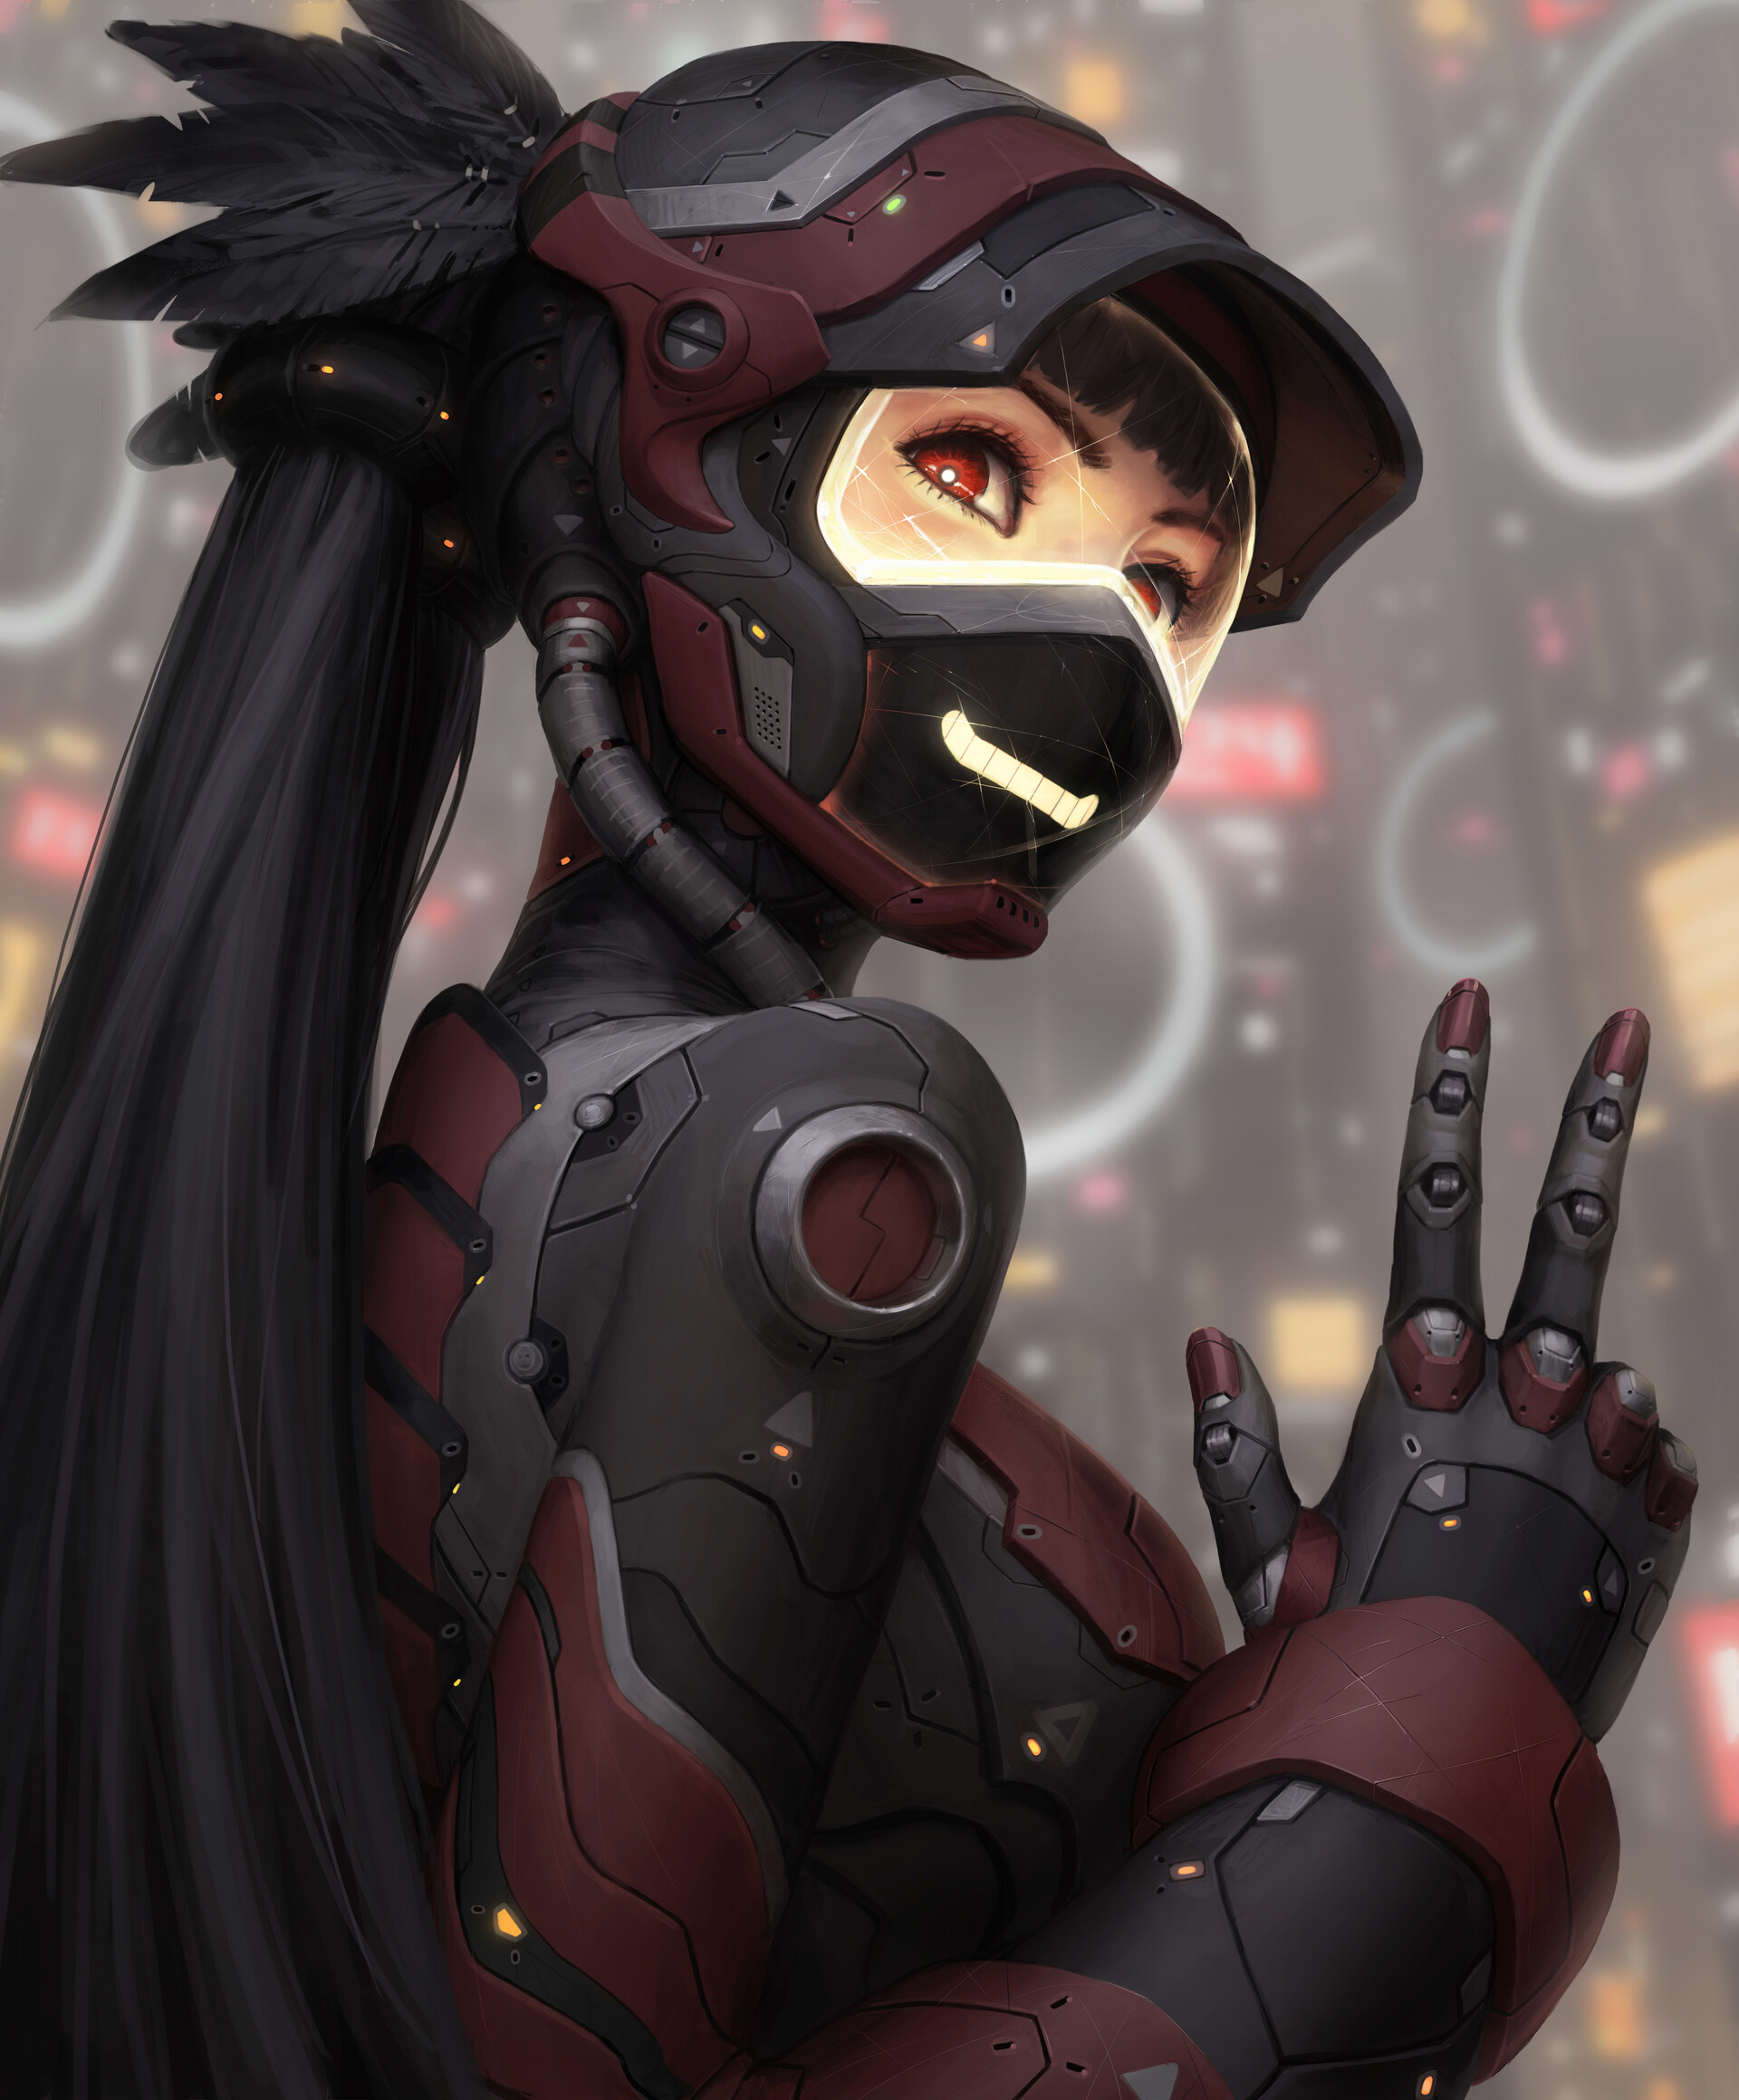 General 1920x2319 GUWEIZ women black hair science fiction illustration drawing original characters peace sign fingers mask long hair depth of field concept art artwork side view portrait display 2D fantasy painting red eyes smiling